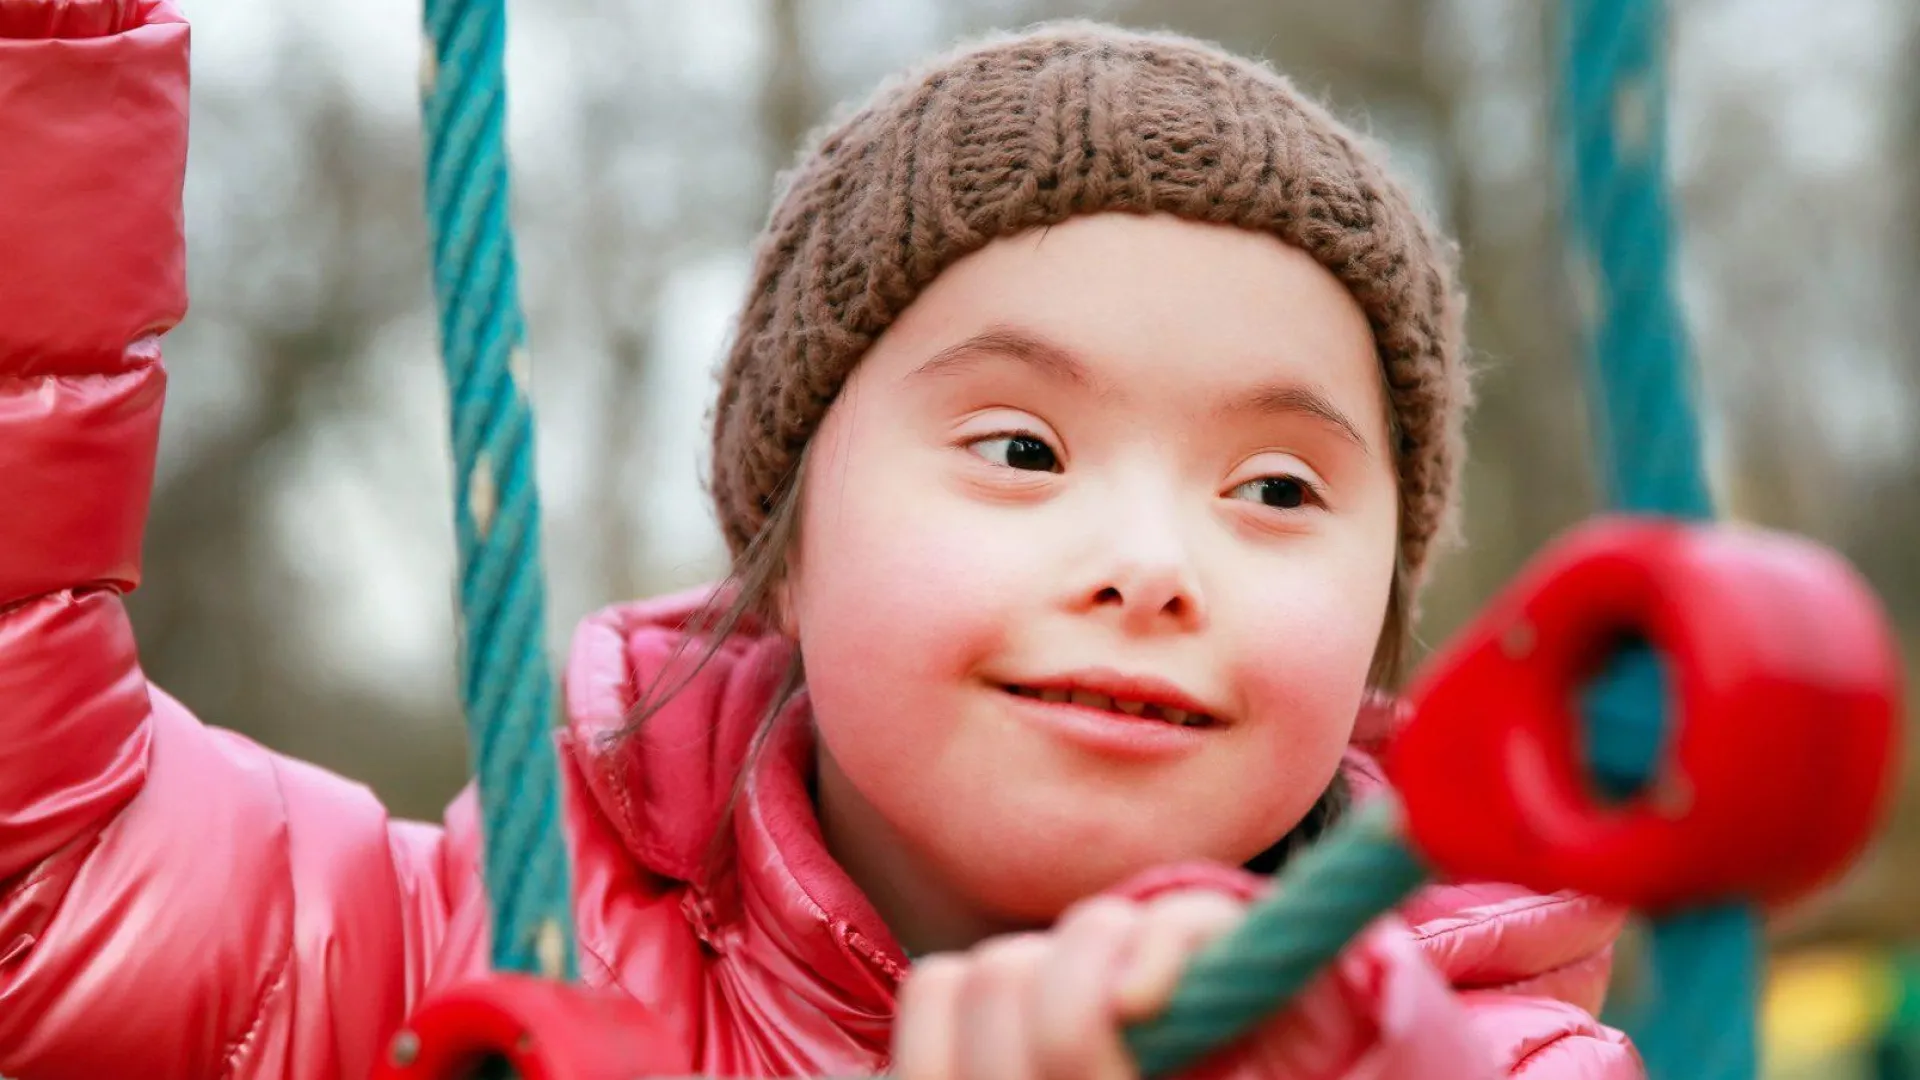 A child with a disability on play equipment